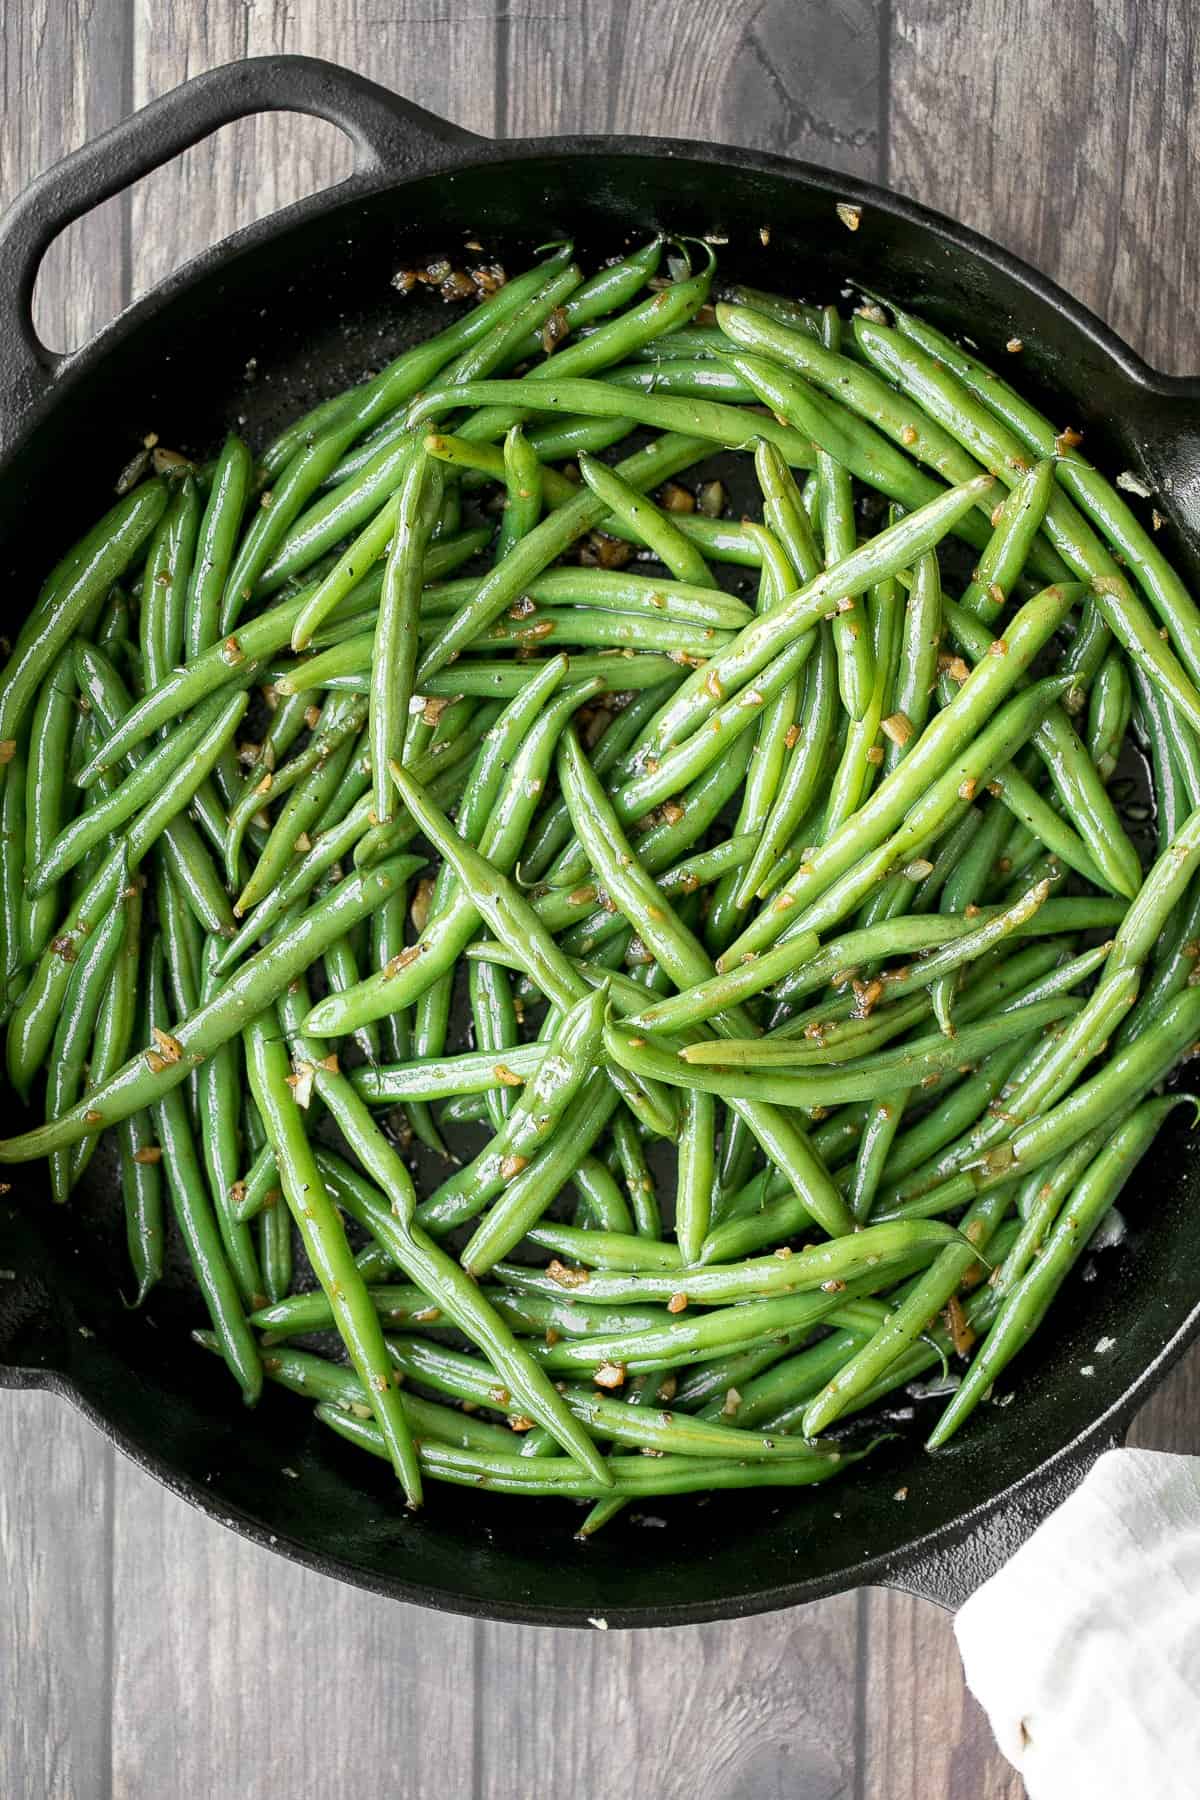 Buttery sautéed garlic green beans is a simple side dish that is quick, easy and delicious. Make these vibrant, crispy and tender green beans in 10 minutes. | aheadofthyme.com